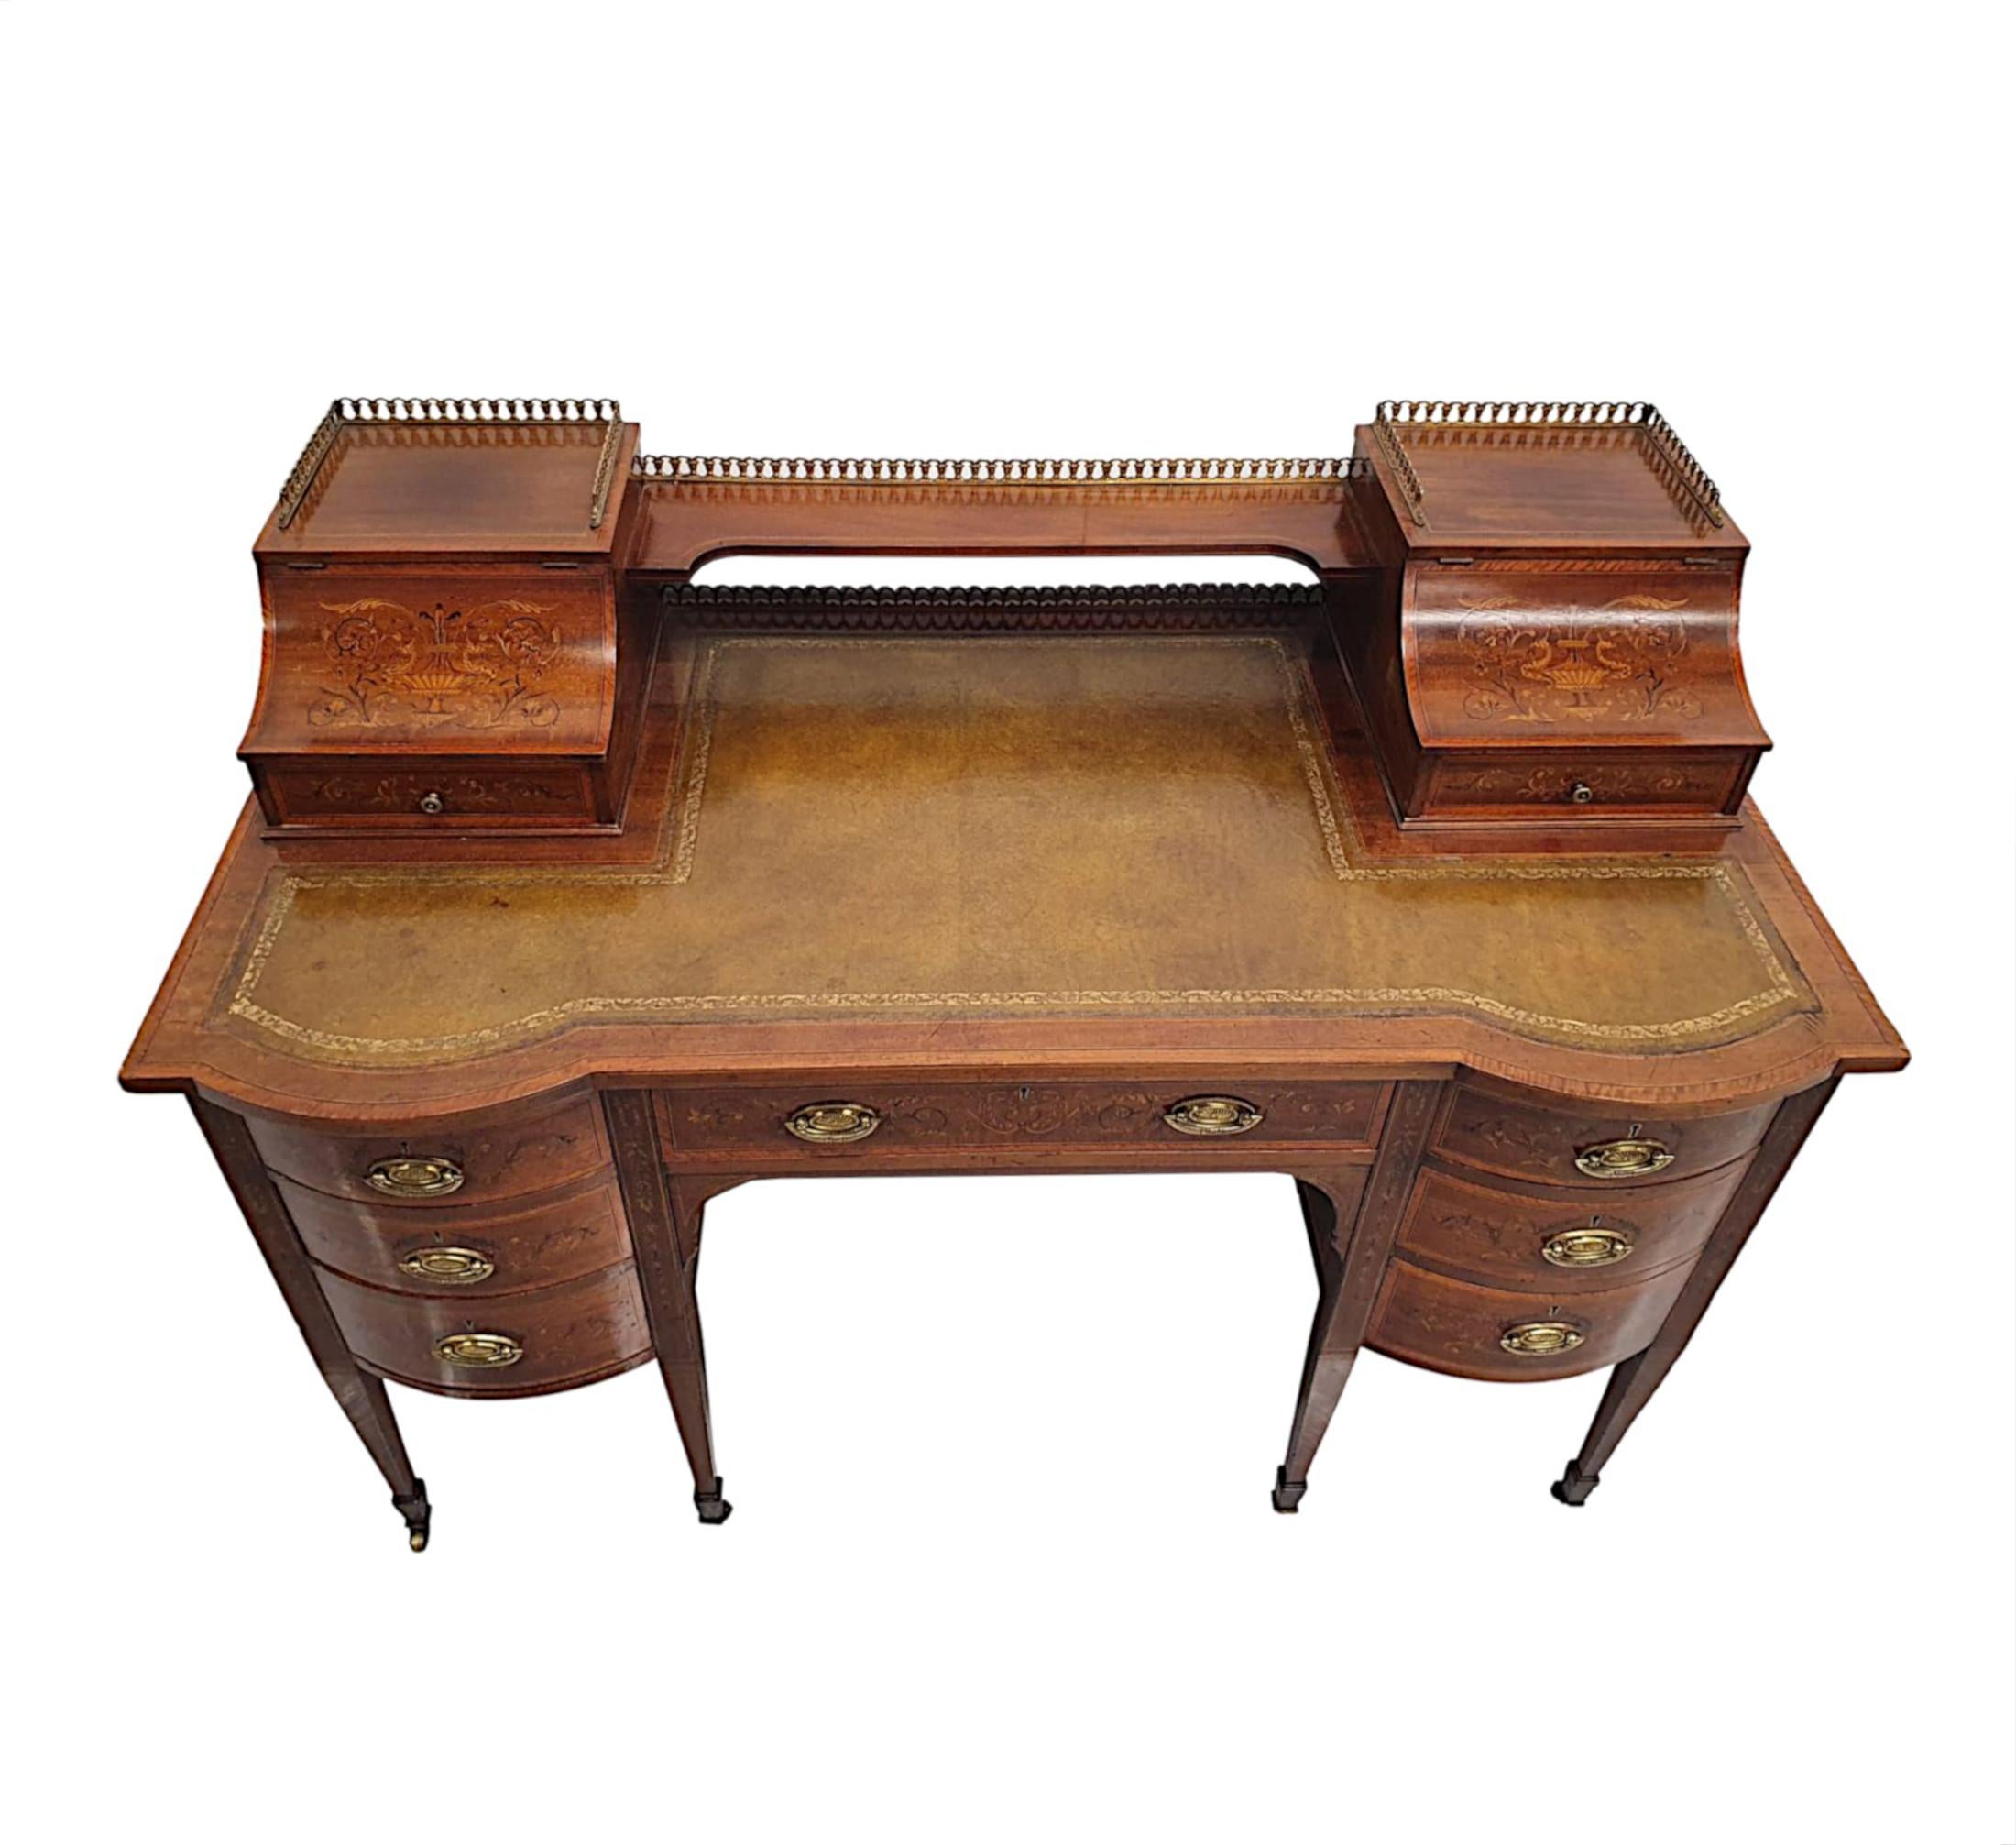 A Stunning Edwardian Desk in the Carlton House Style by Maple of London In Good Condition For Sale In Dublin, IE